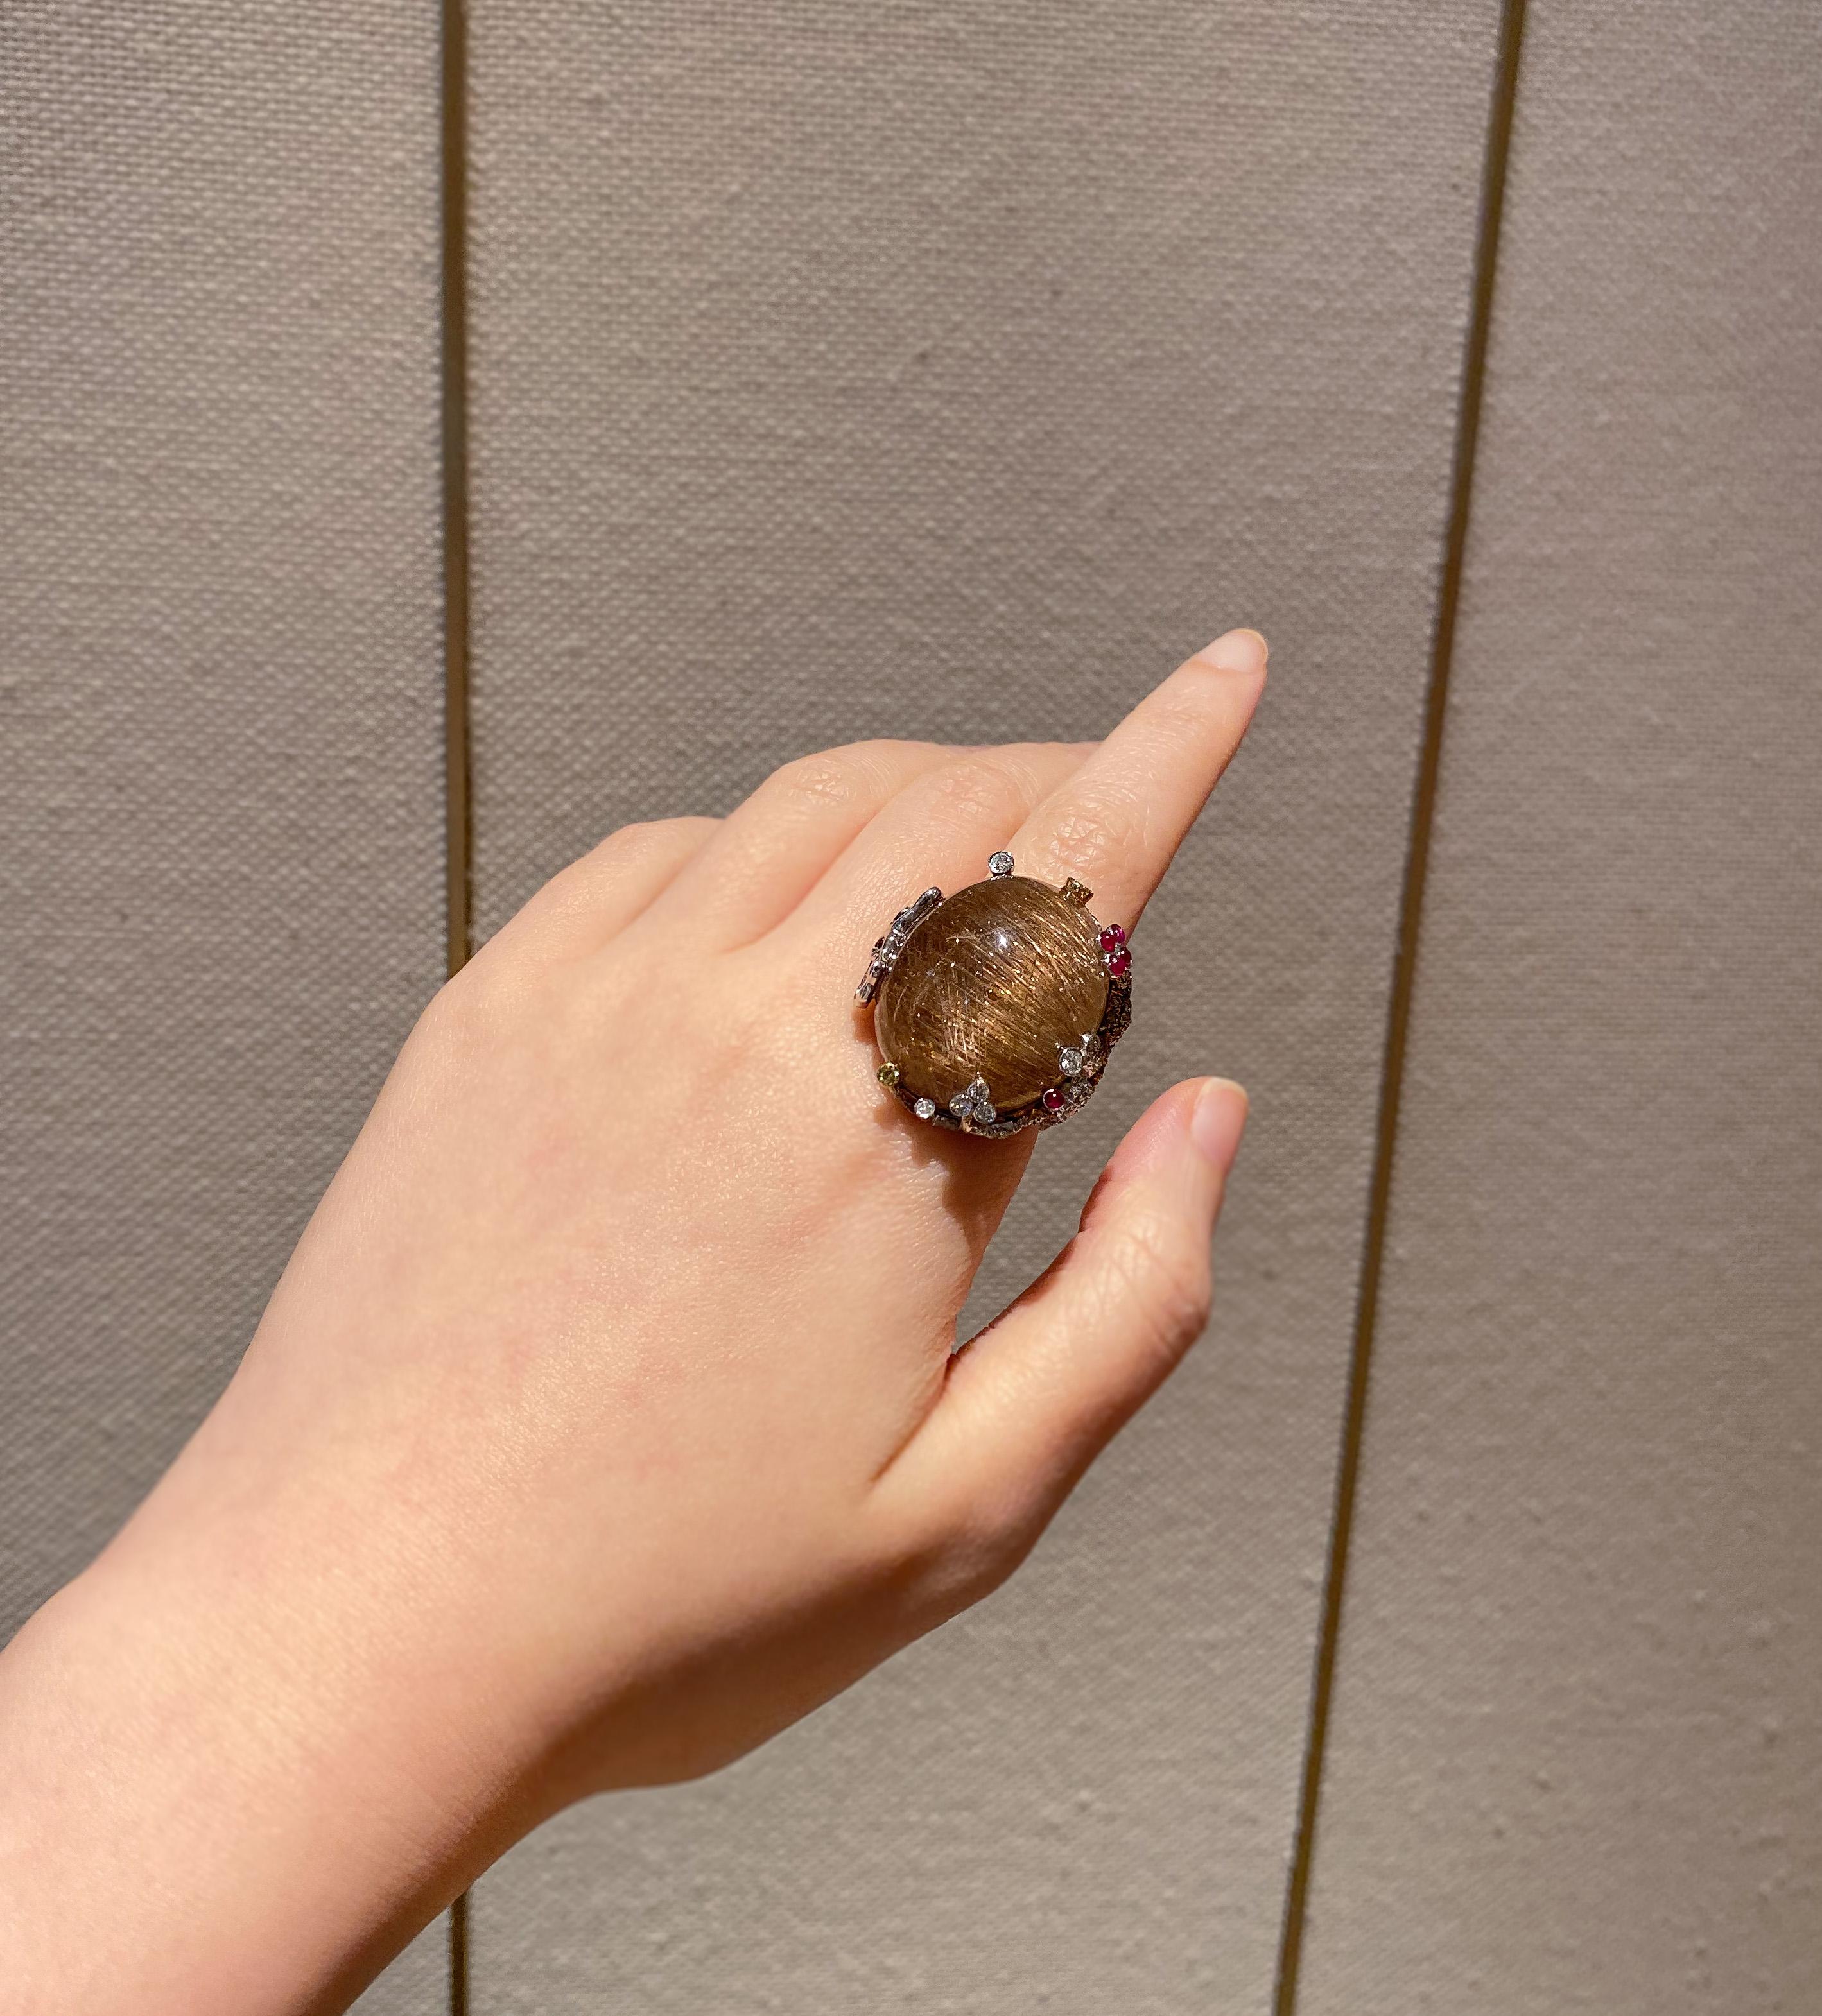 Hong Kong’s renowned yet private fine jewelry designer, Dilys Young, designed this one-of-a-kind cocktail ring to celebrate the healing powers of the ginseng root while showcasing an incredibly unique stone – the 48.21-carat rutile quartz. A common